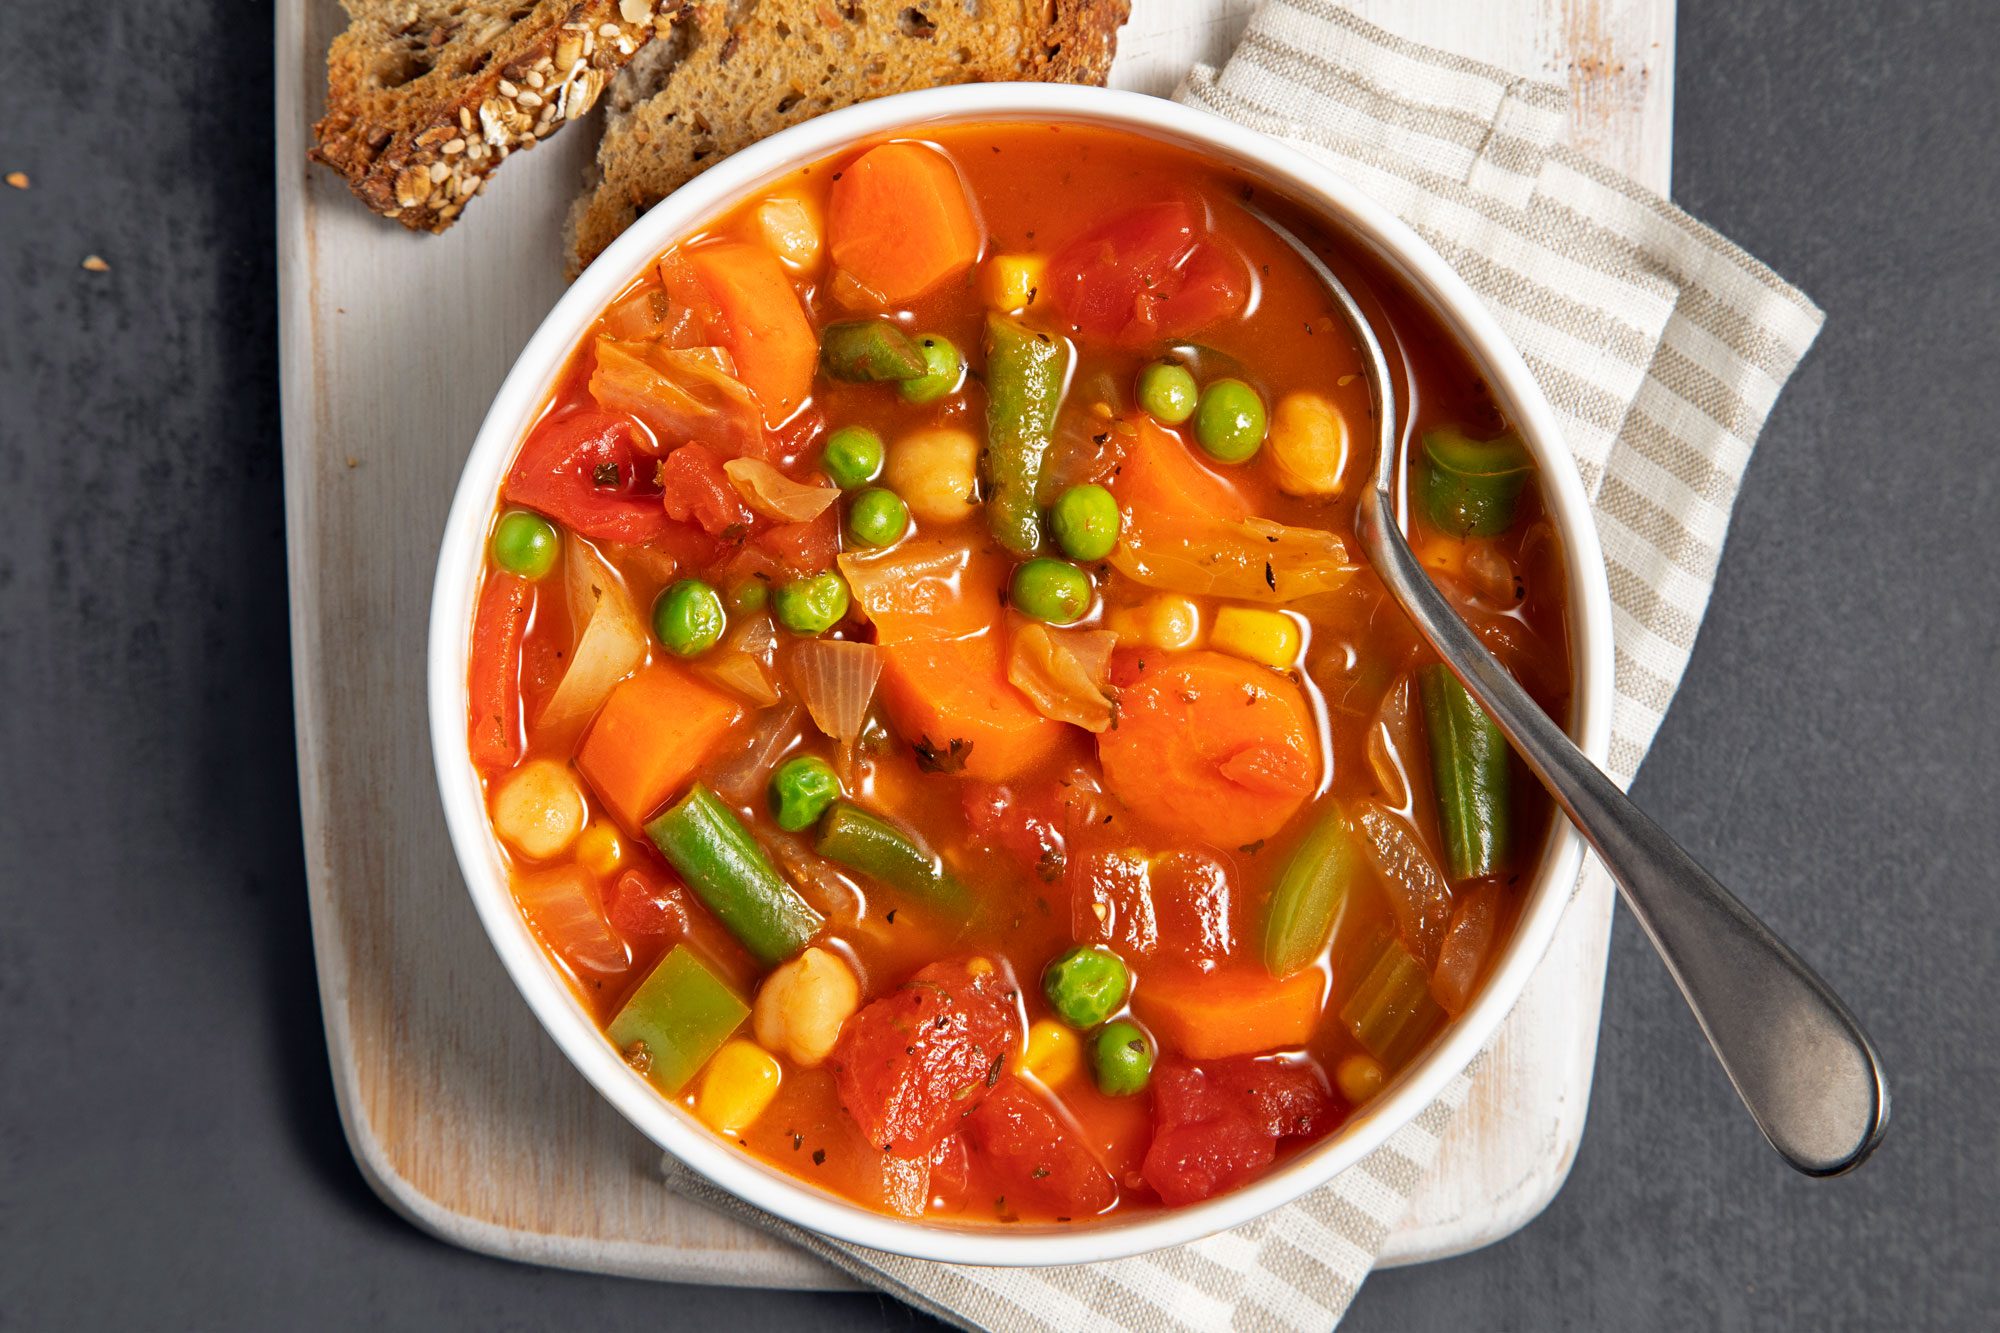 Hearty Vegetable Soup served in a bowl with bread and a spoon